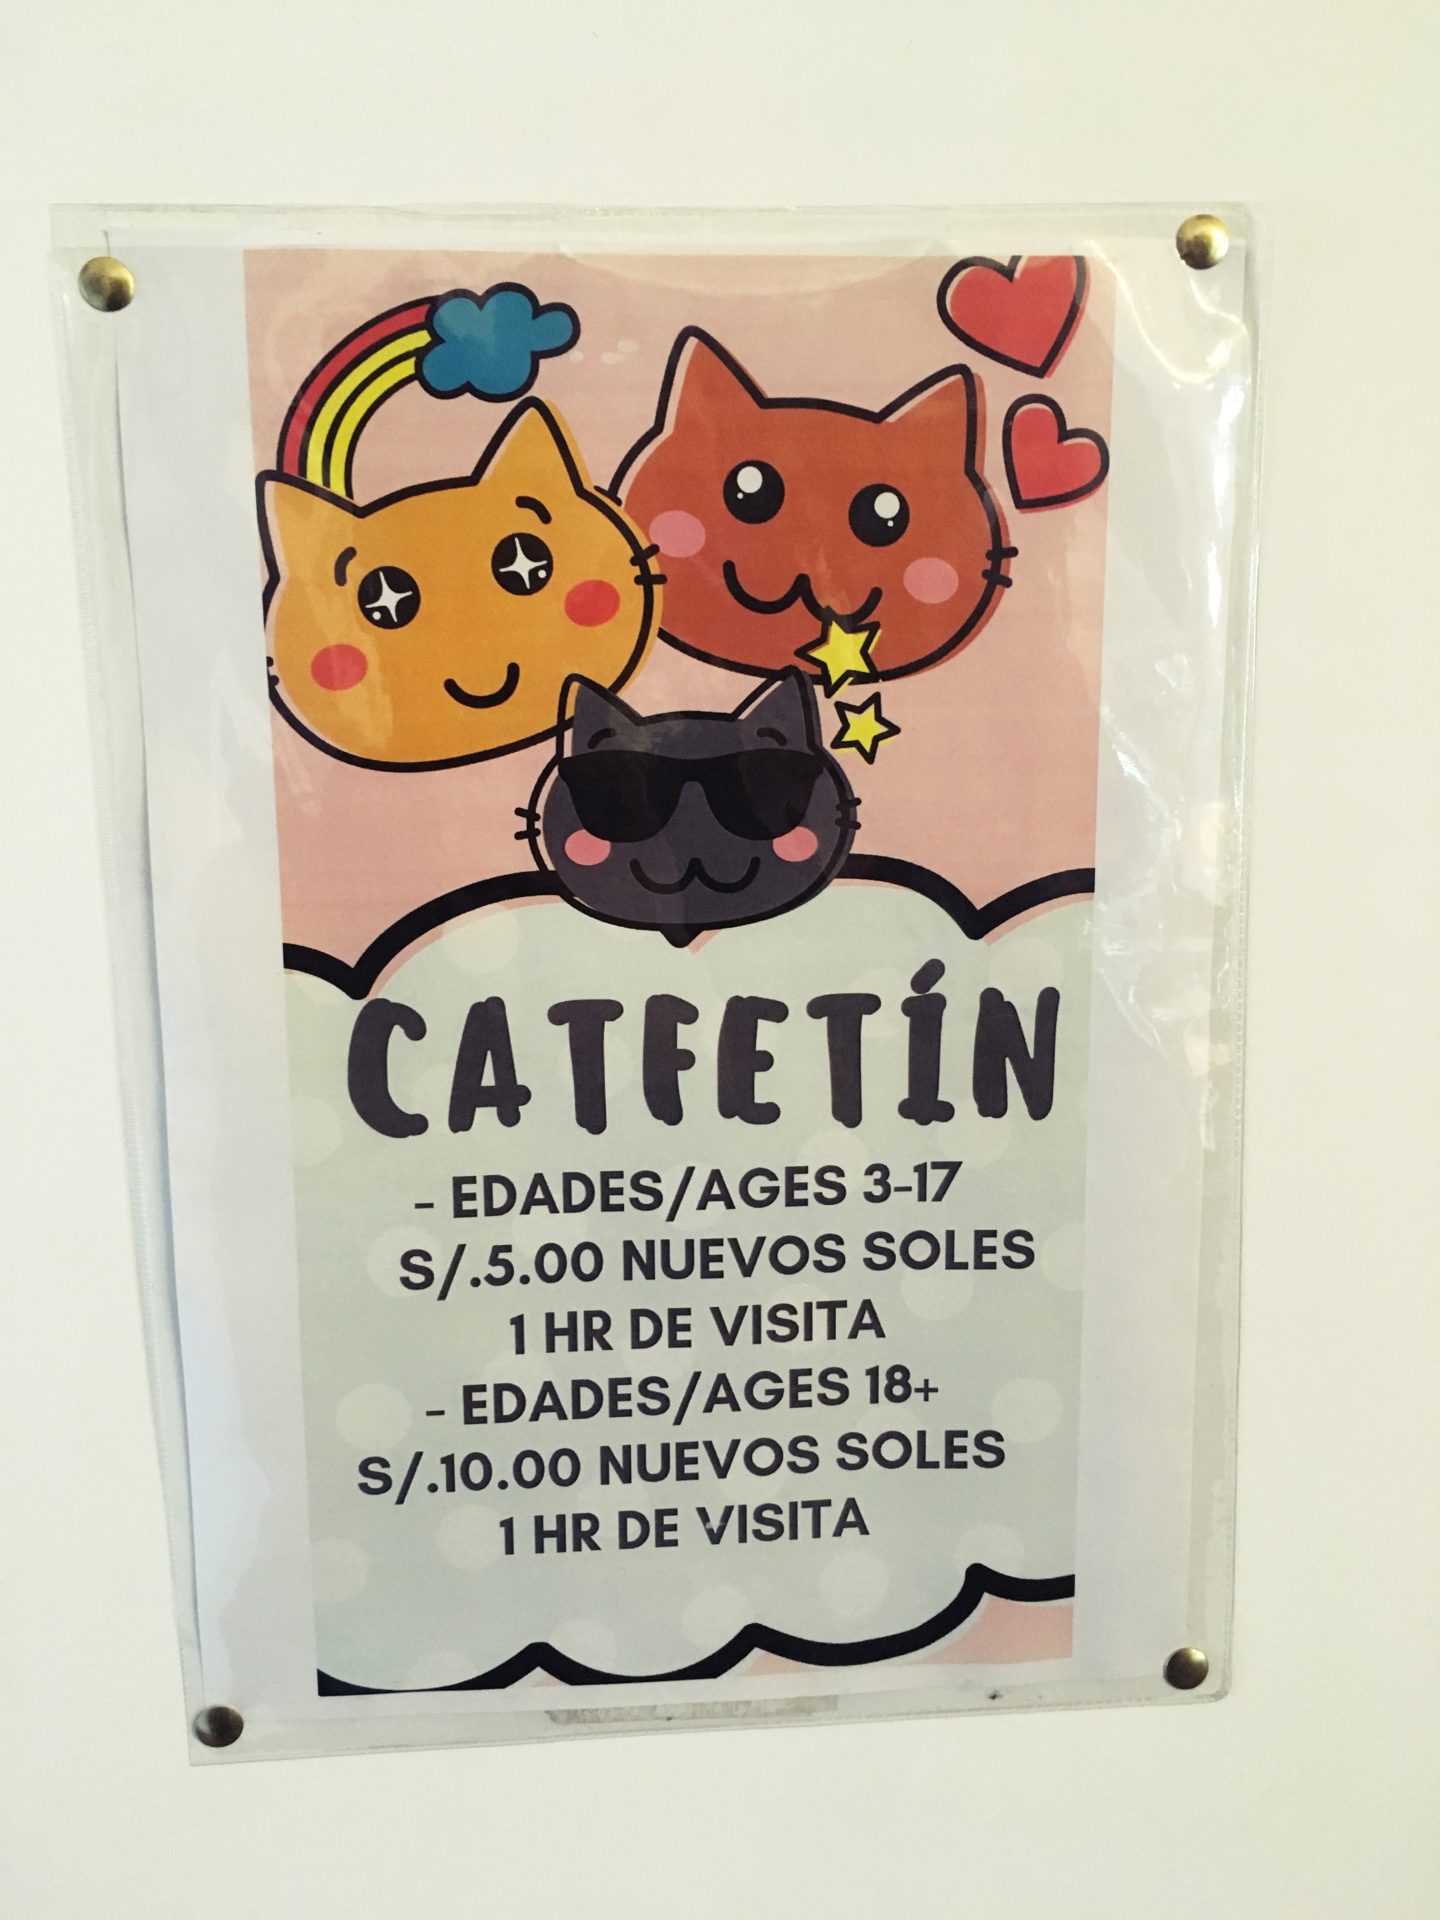 Cat, Cafe, Cafeteria, Cafetin, ペルー, クスコ, ねこ, カフェ